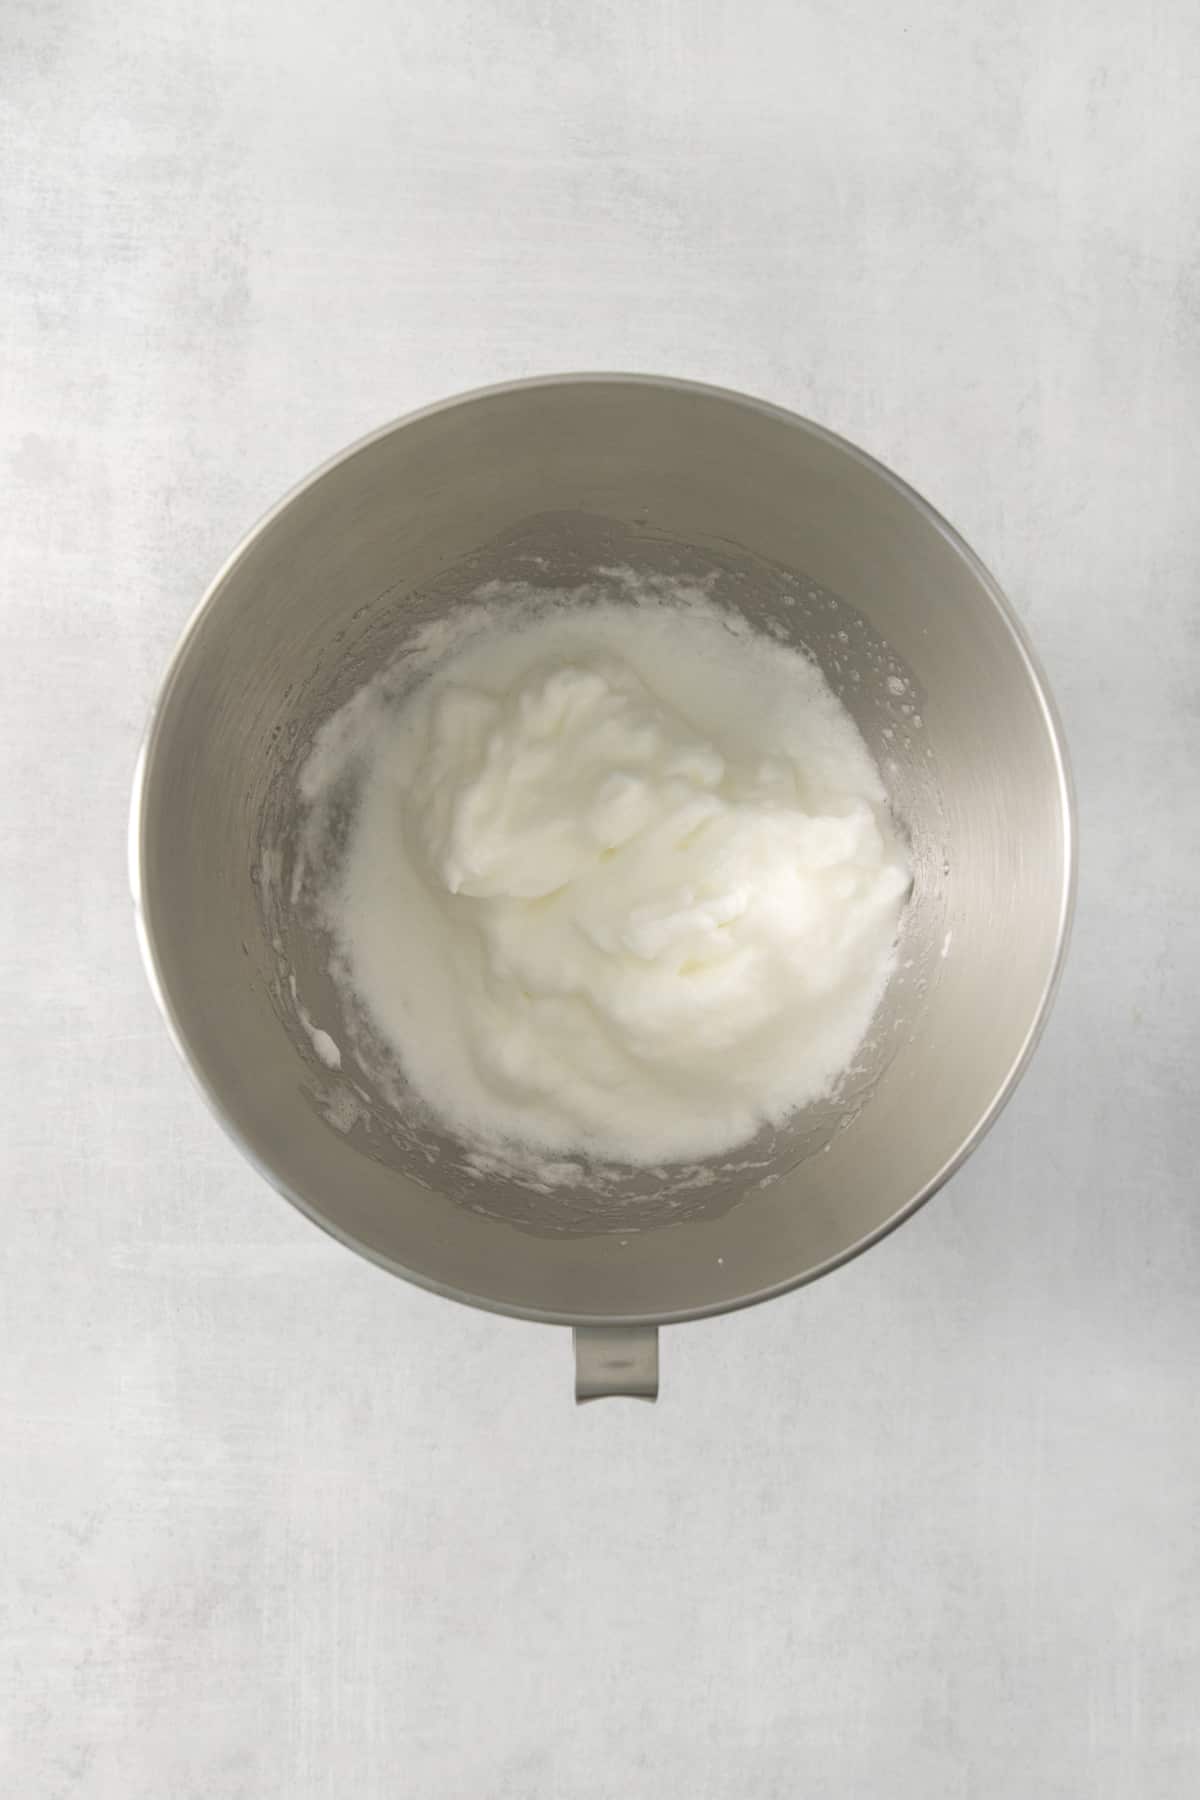 egg whites whipped in a mixing bowl from above.